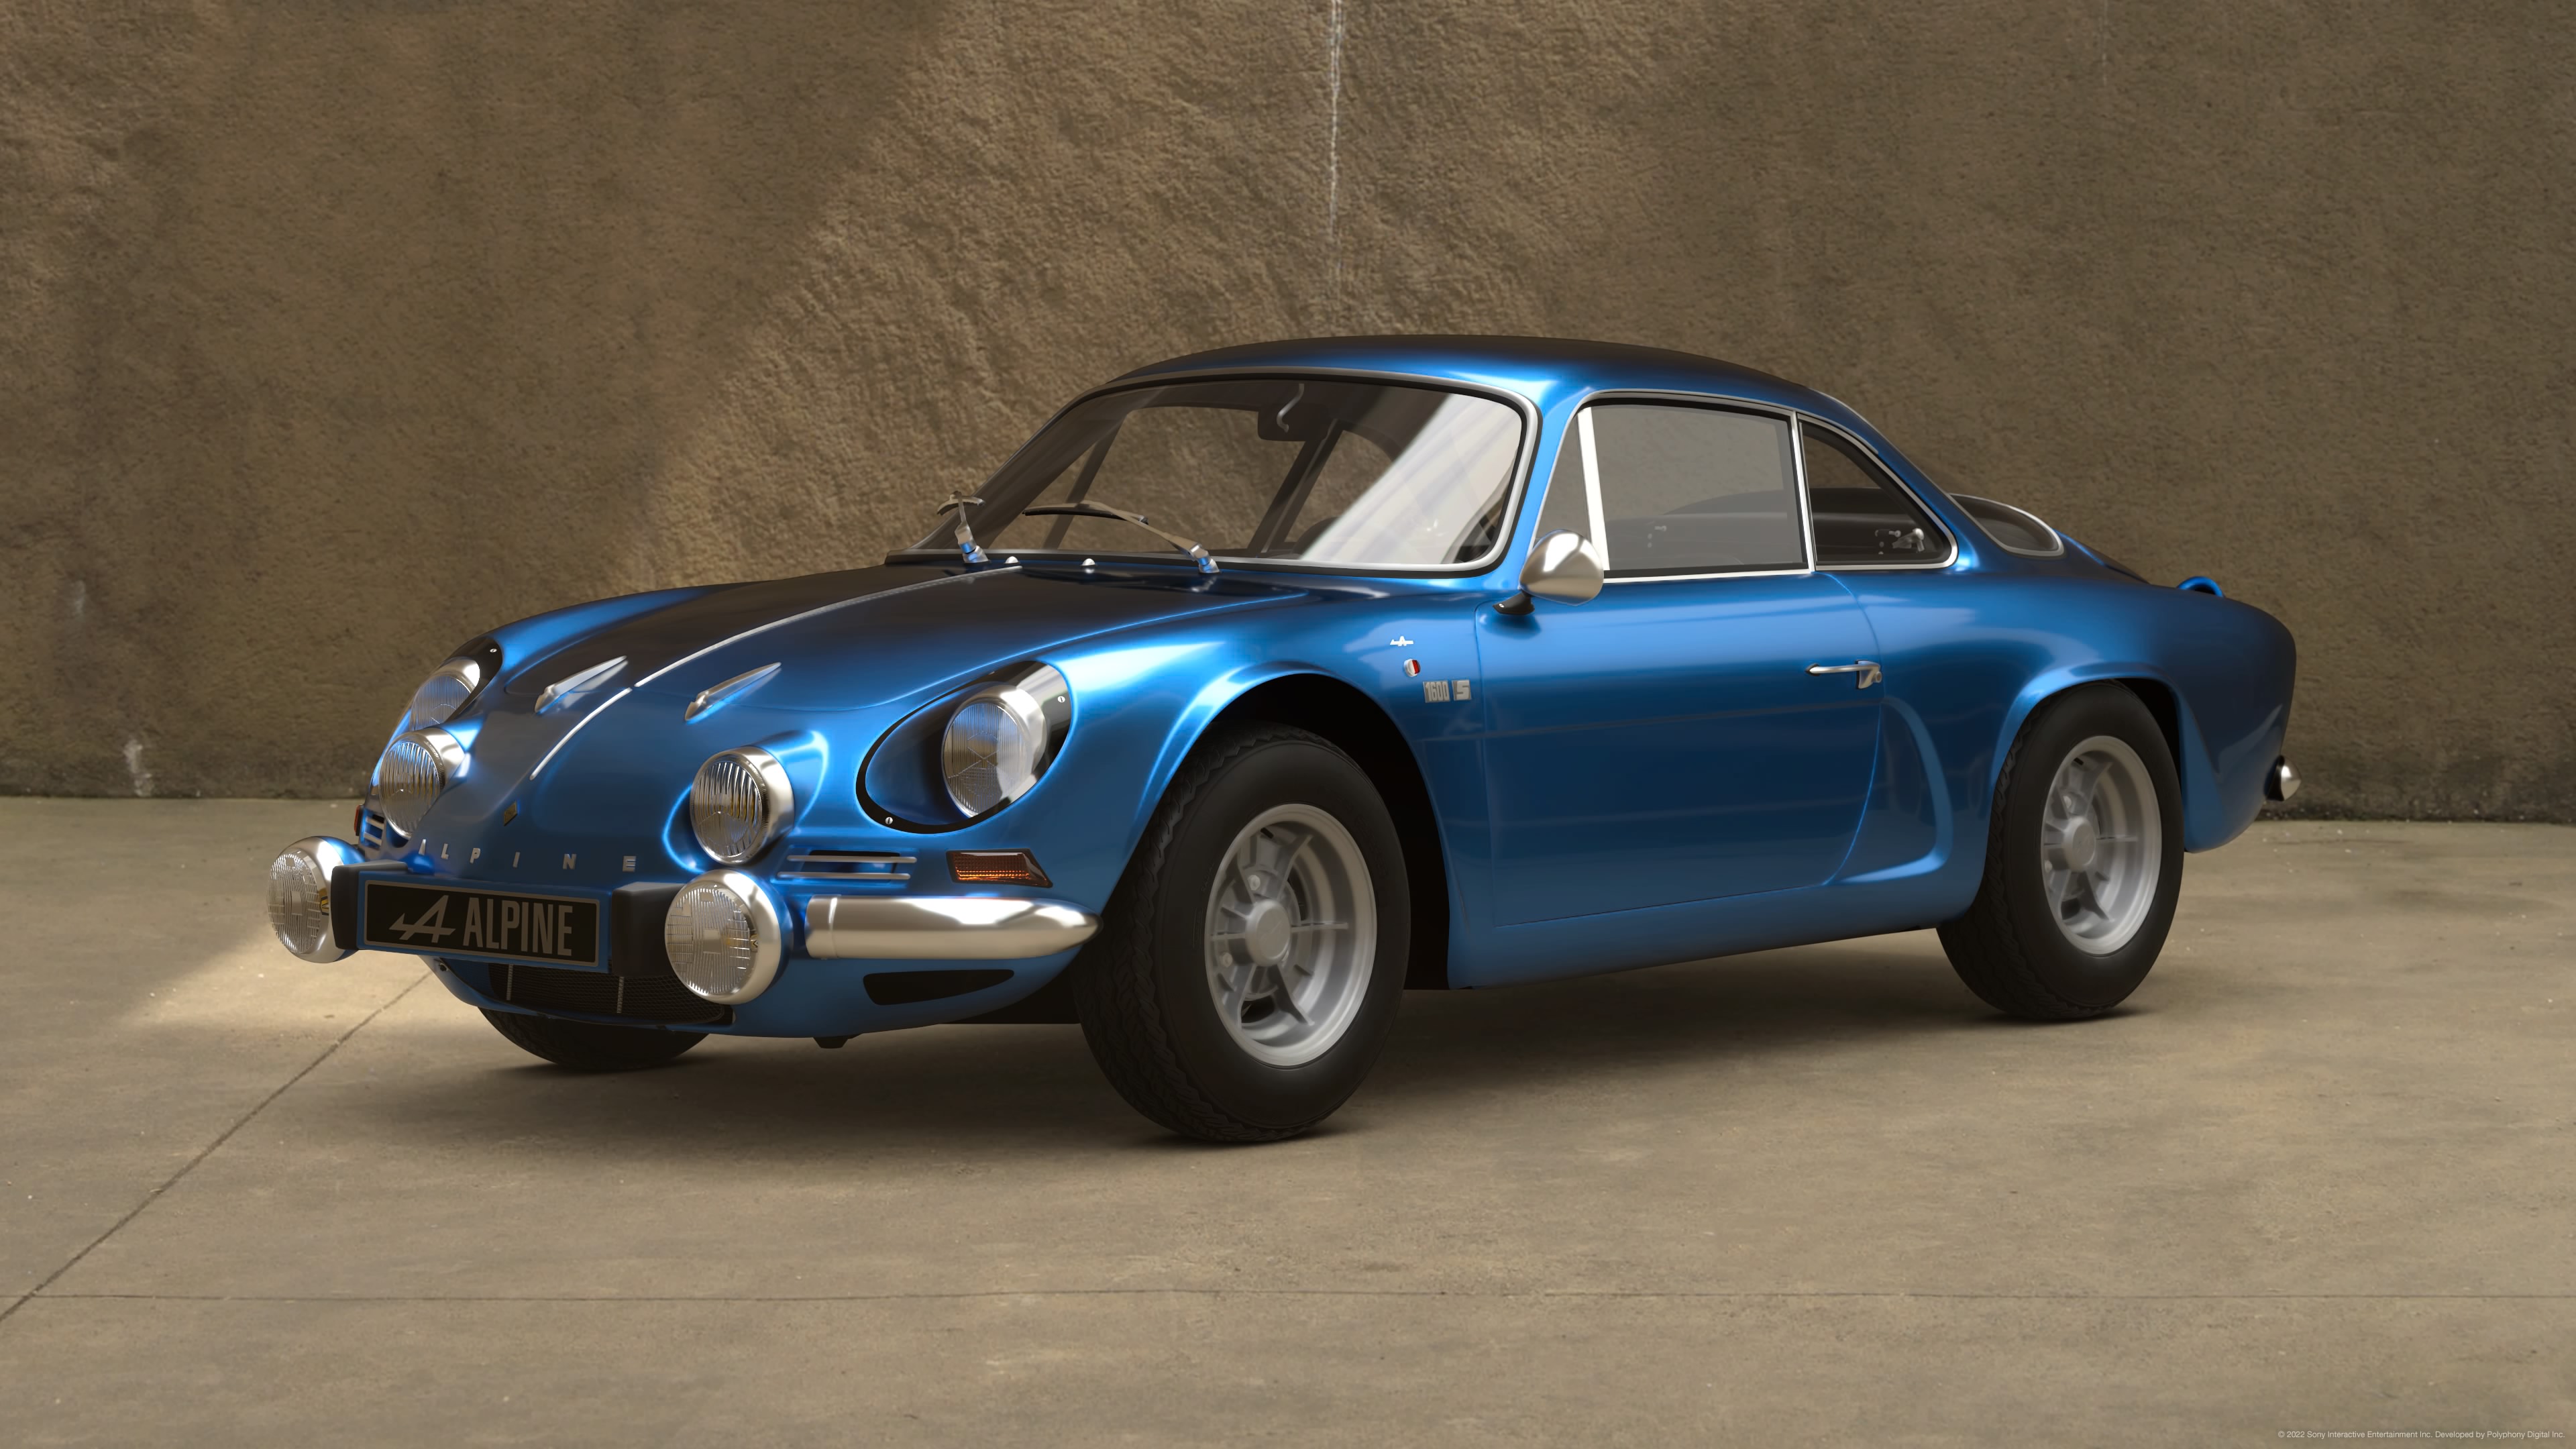 https://static.wikia.nocookie.net/gran-turismo/images/f/fb/Alpine_A110_1600S_%2772.jpg/revision/latest?cb=20220419140739